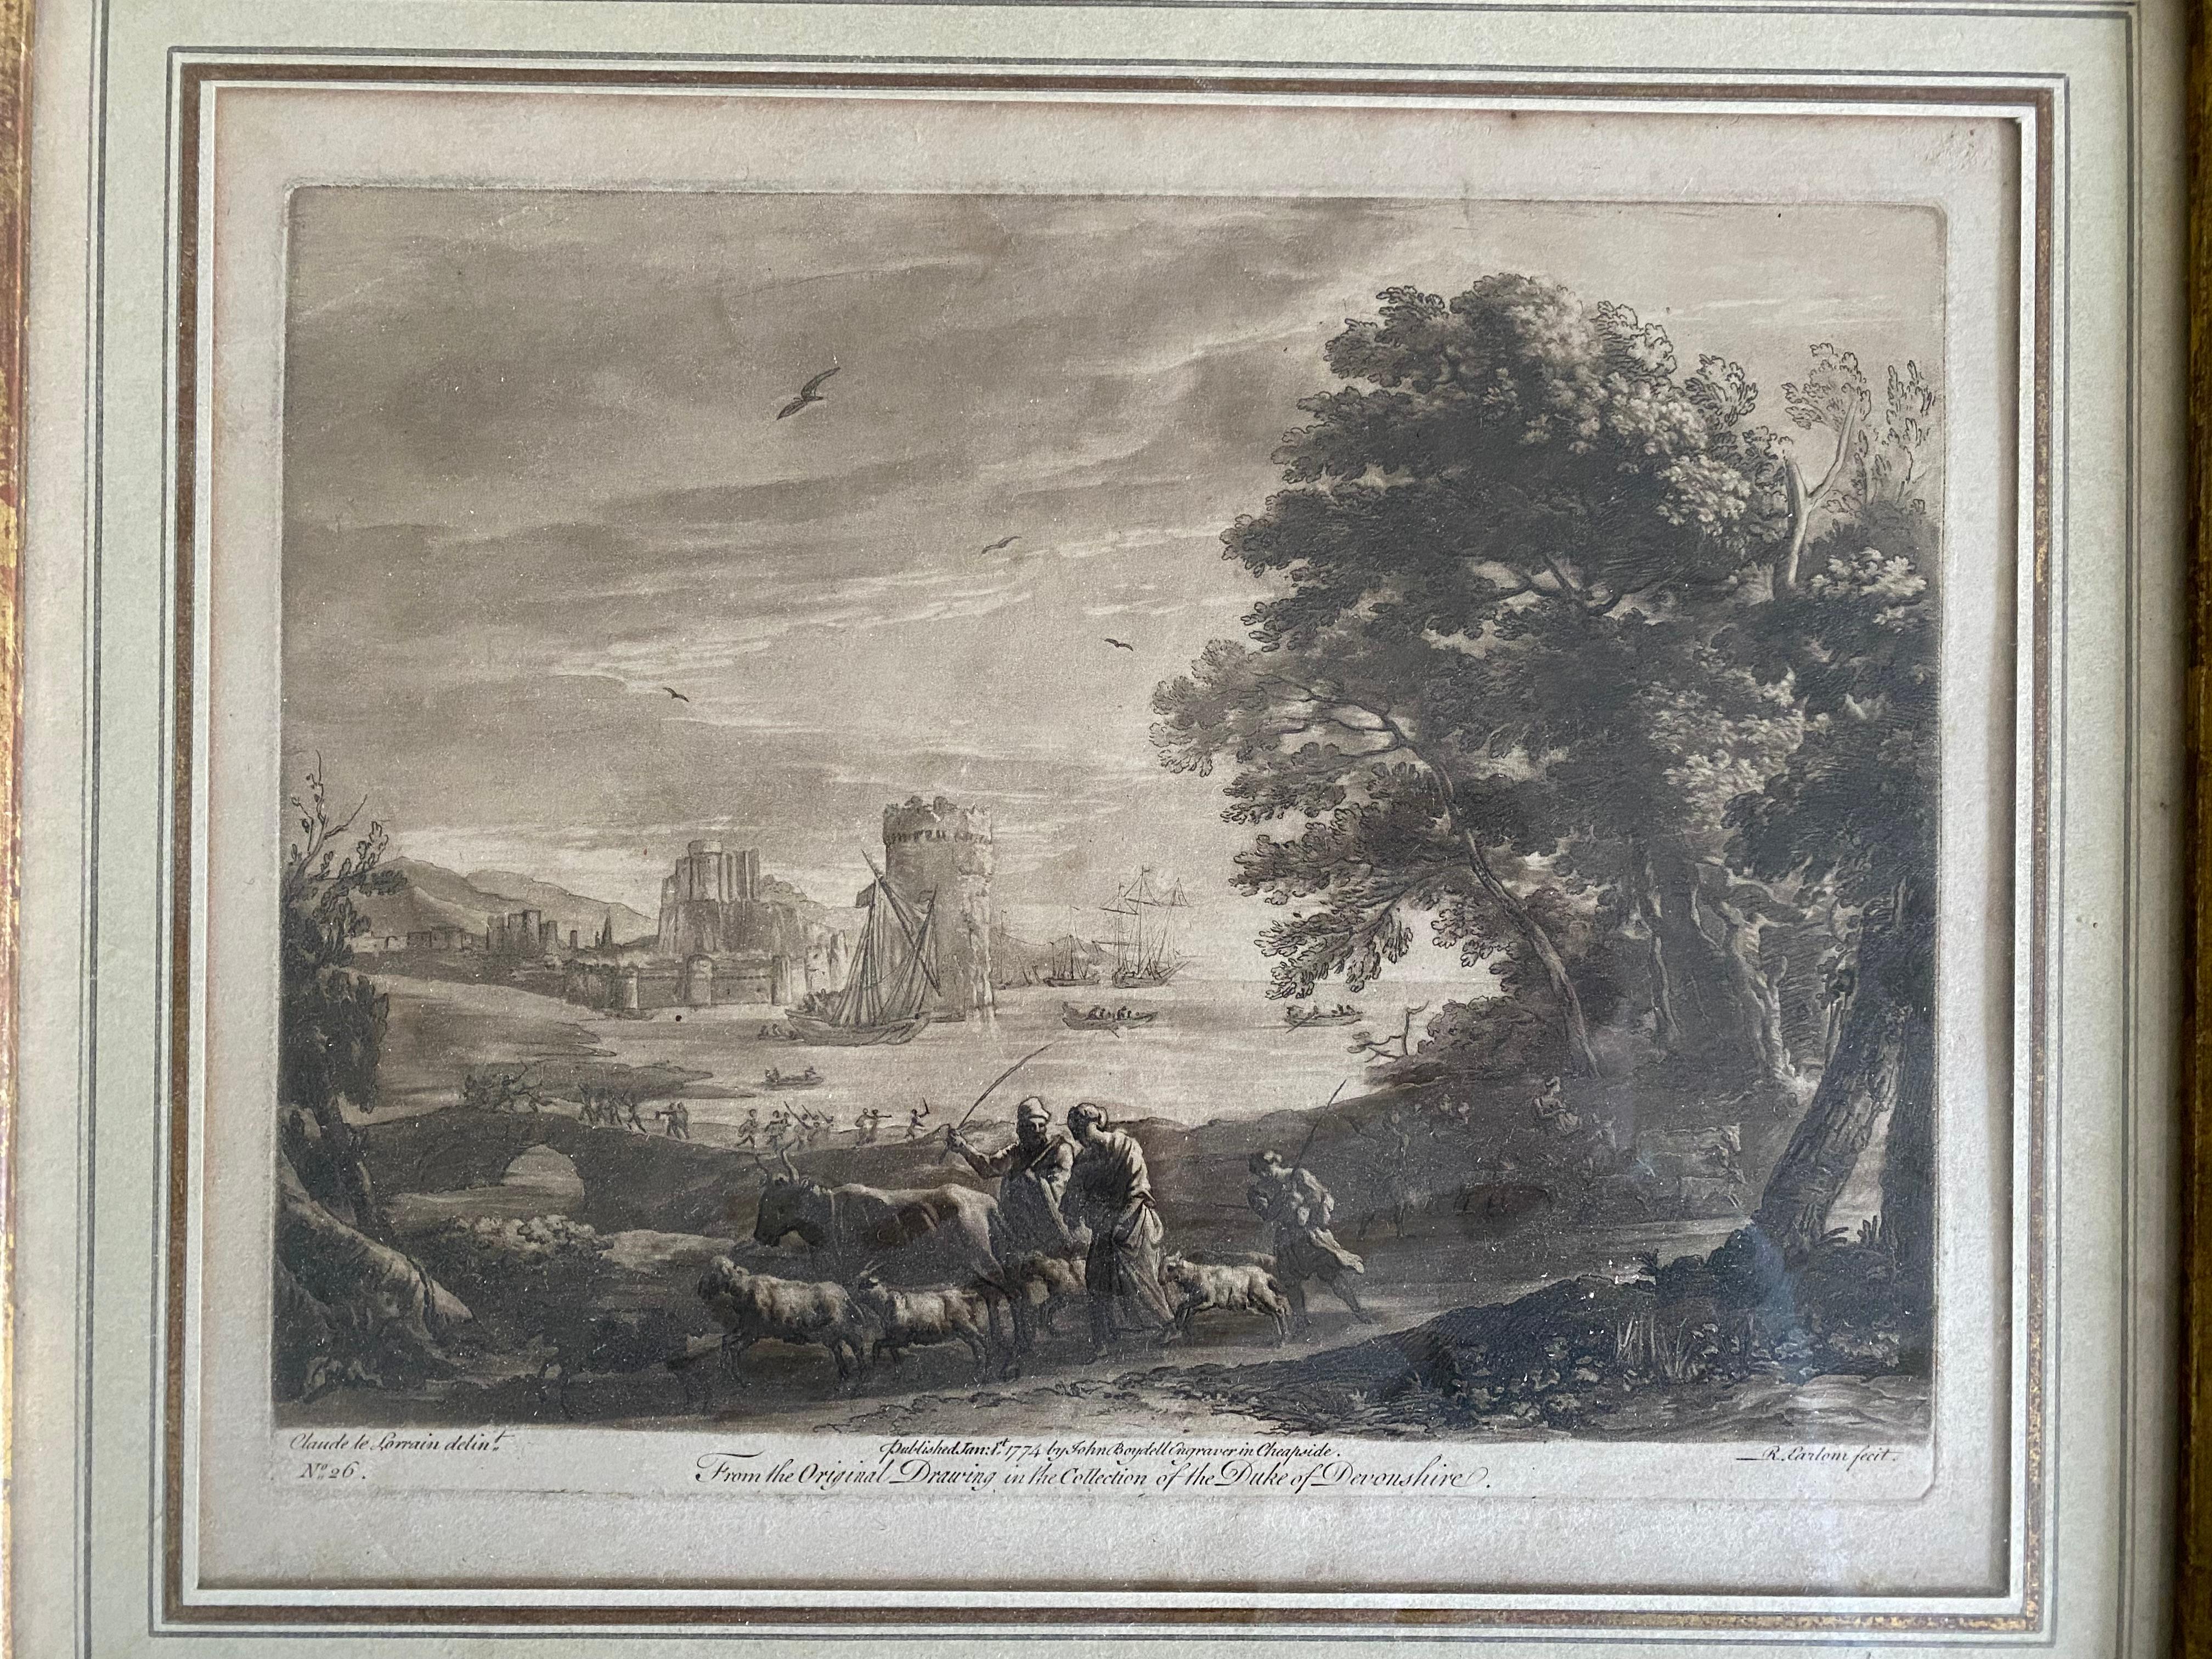 Beautiful engraving made by John Boydell from a work by Claude Lorrain. It represents shepherds guiding their cattle in the forest in front of a harbor landscape with ships. On the back of the frame is glued the framer's label with the words: